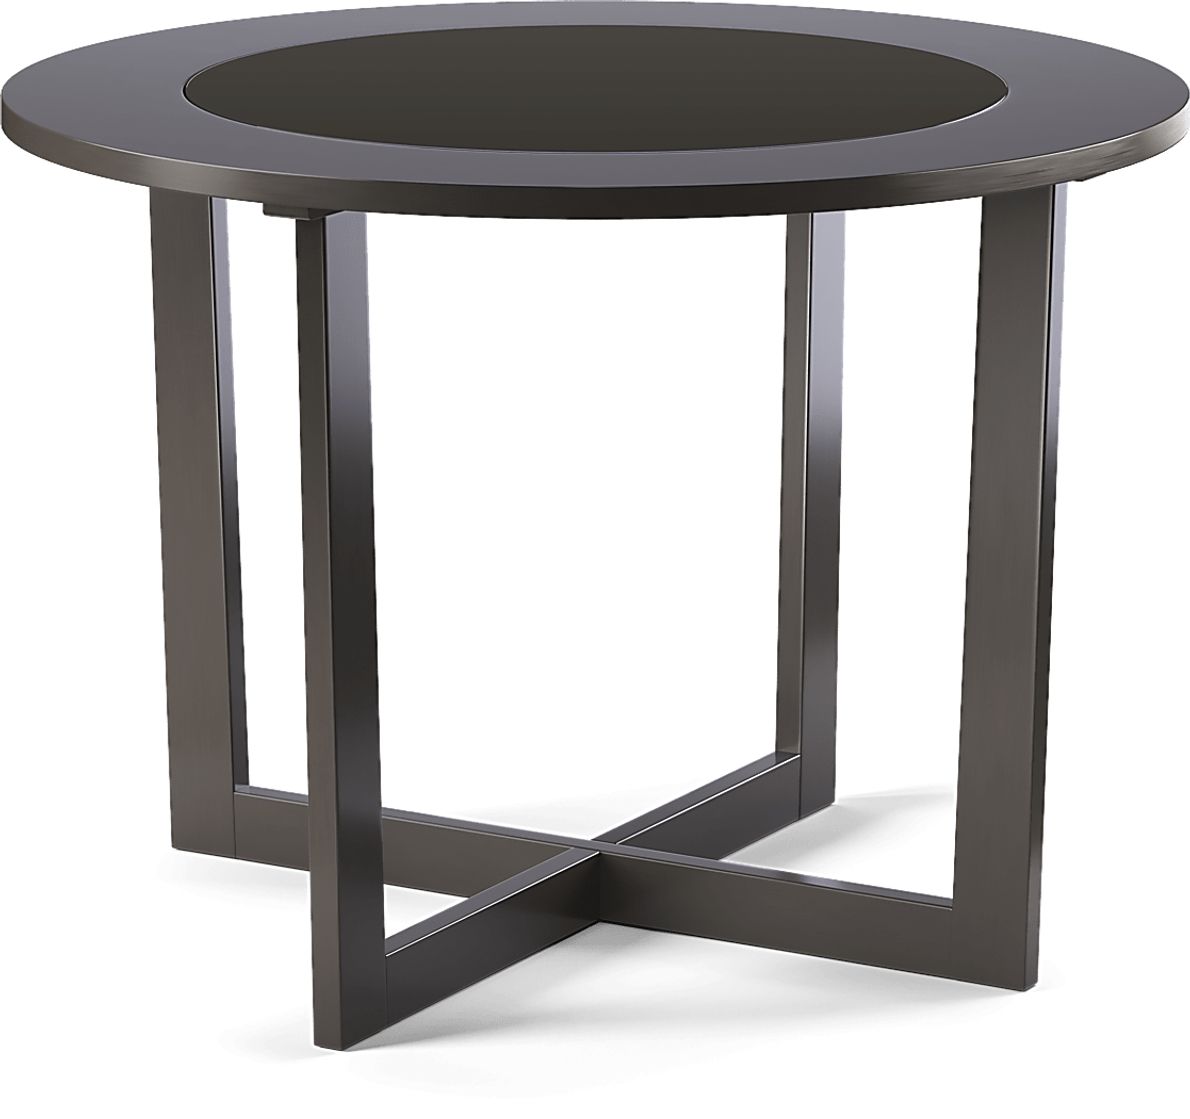 Mabry Espresso Round Dining Table